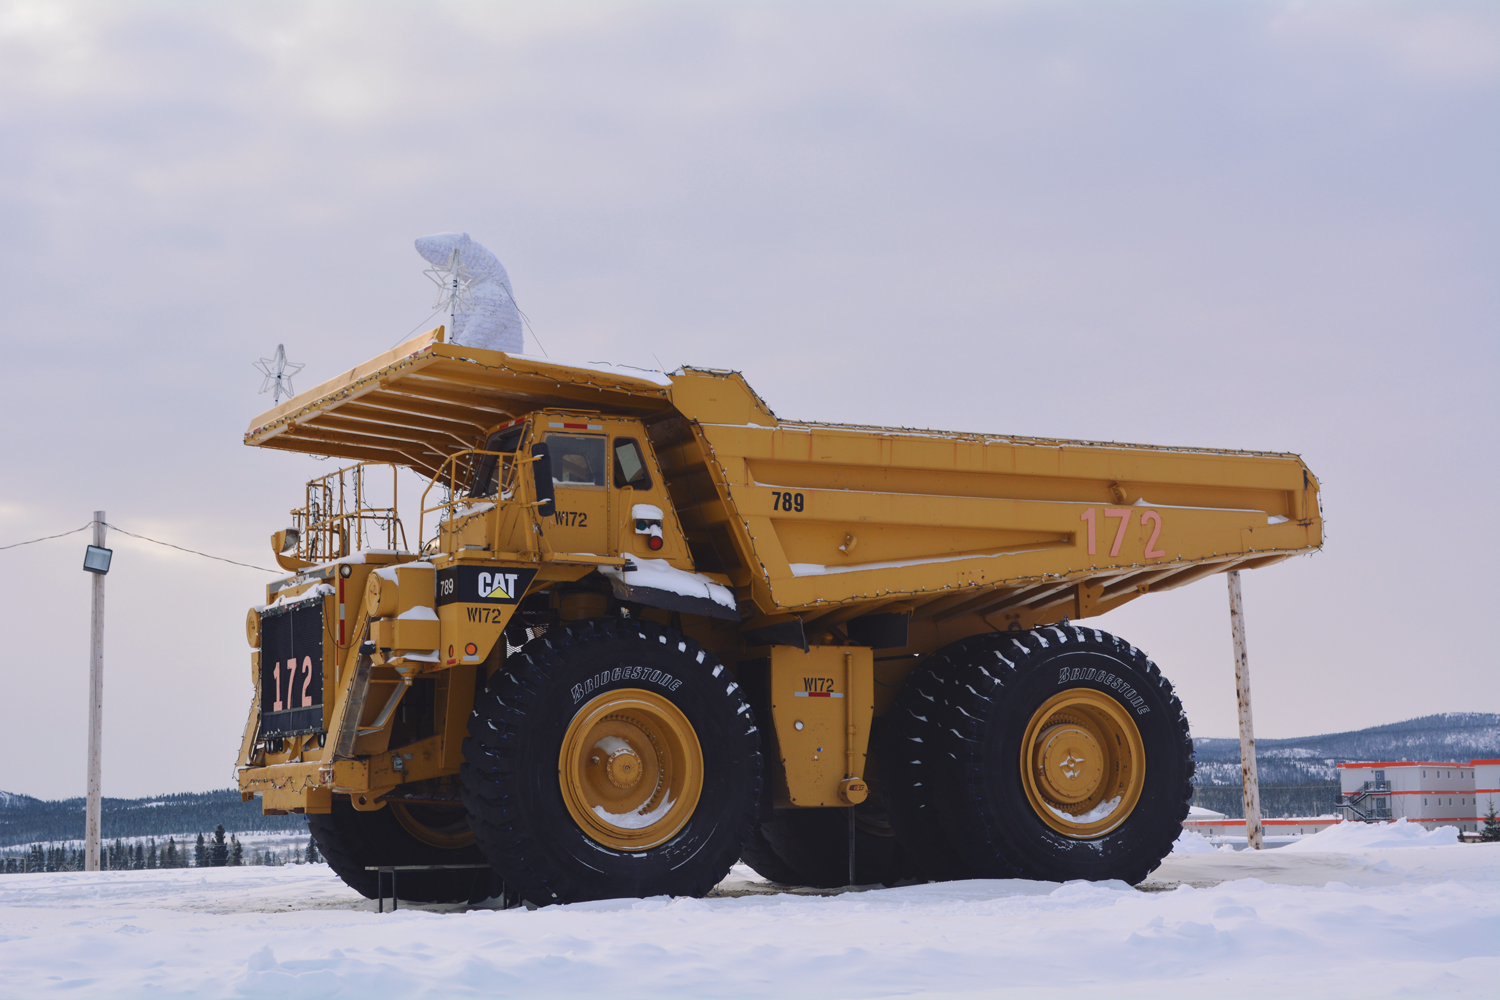 A 190 tons mining dump truck symbolizes the city of Fermont (QC)